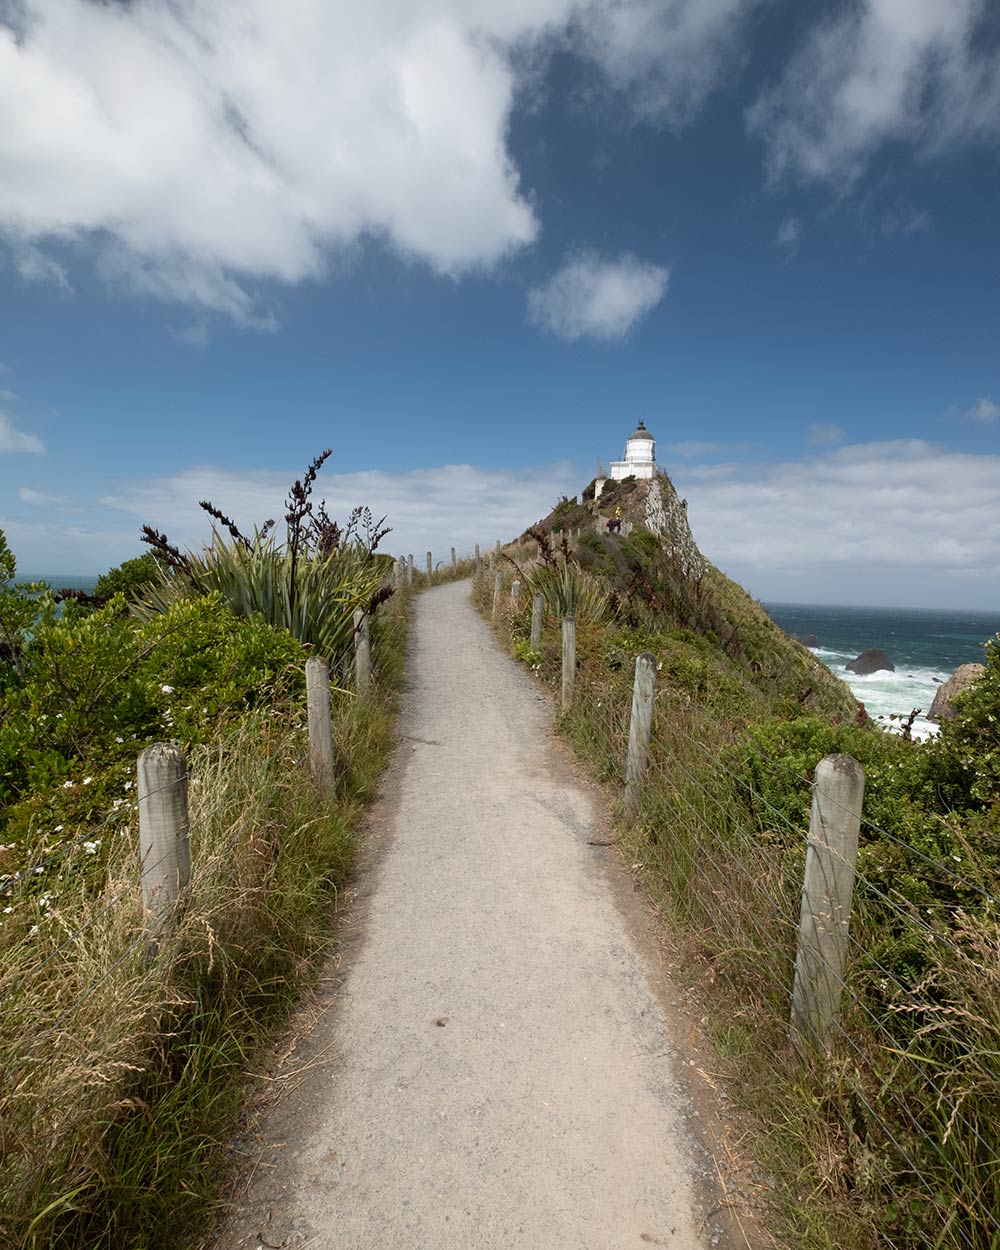 A footpath leads to a lighthouse, the path is flanked lots of green overgrown plants and grass. This is the RAW unedited image without a preset applied.